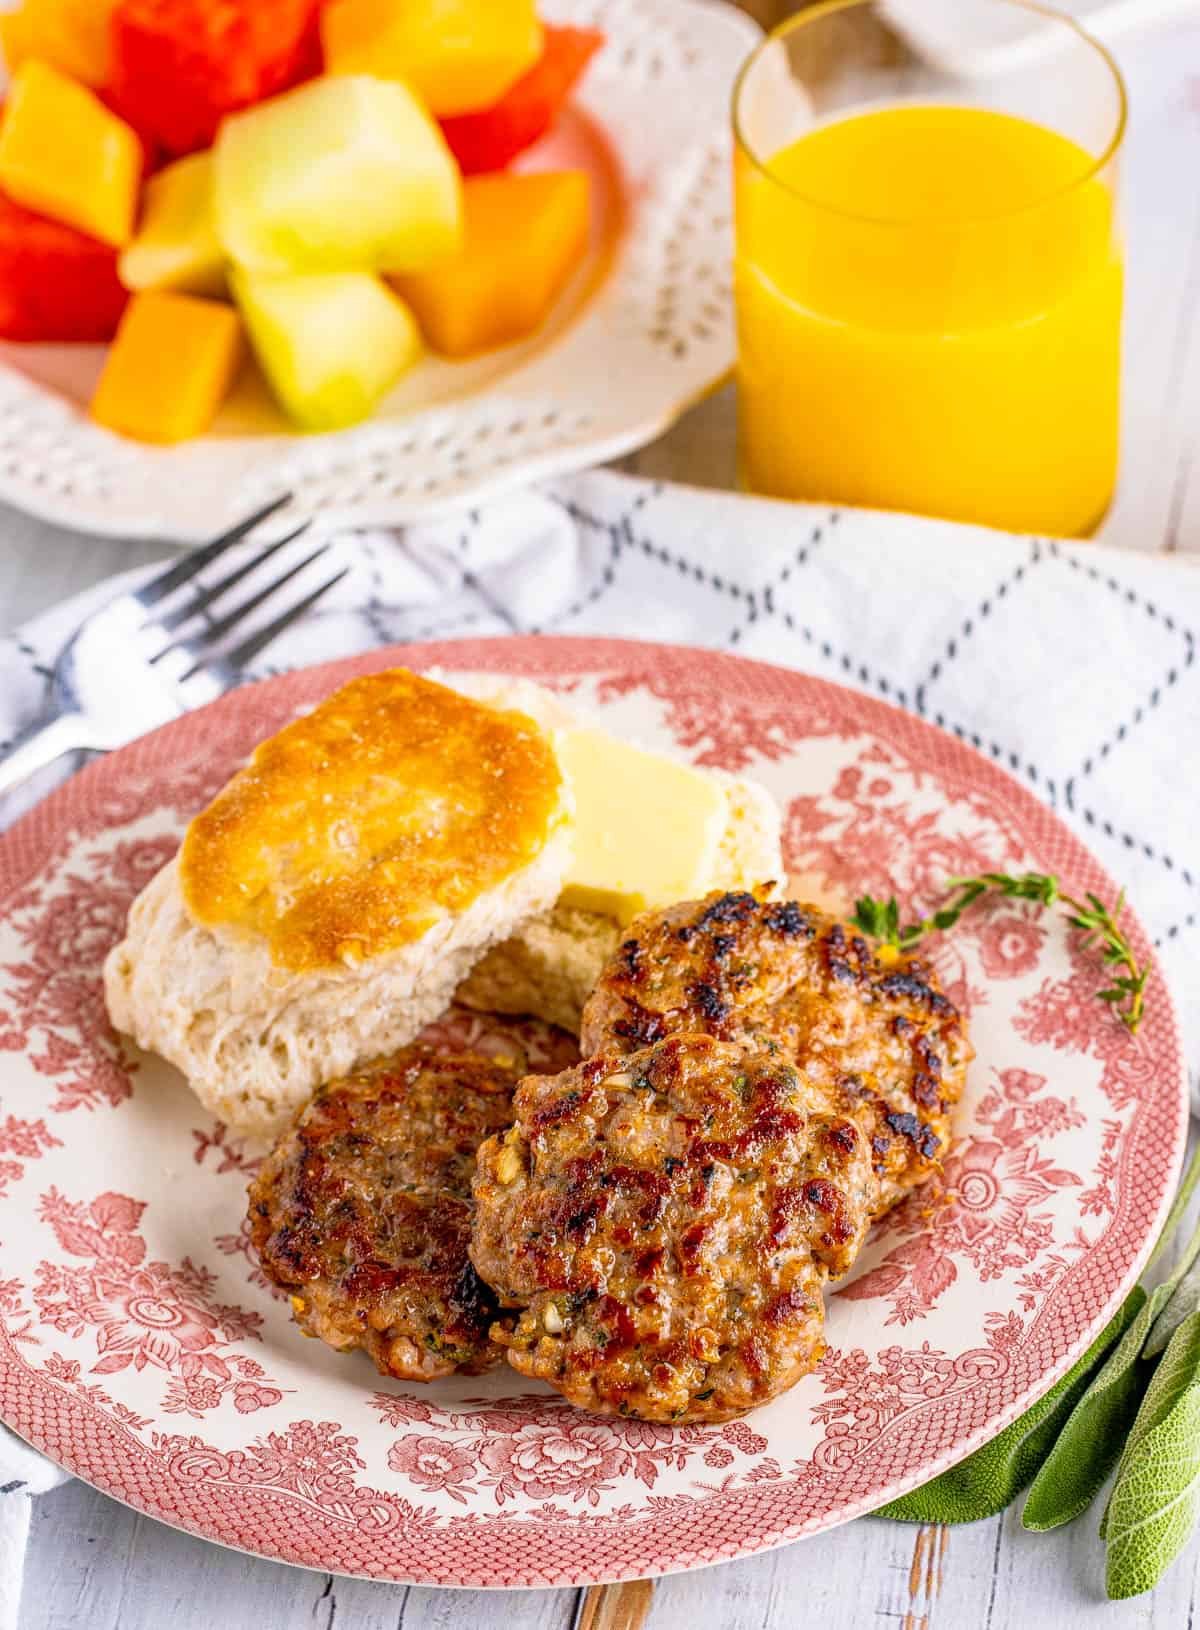 Four stacked patties of the Breakfast Sausage Recipe on plate with biscuit and butter.